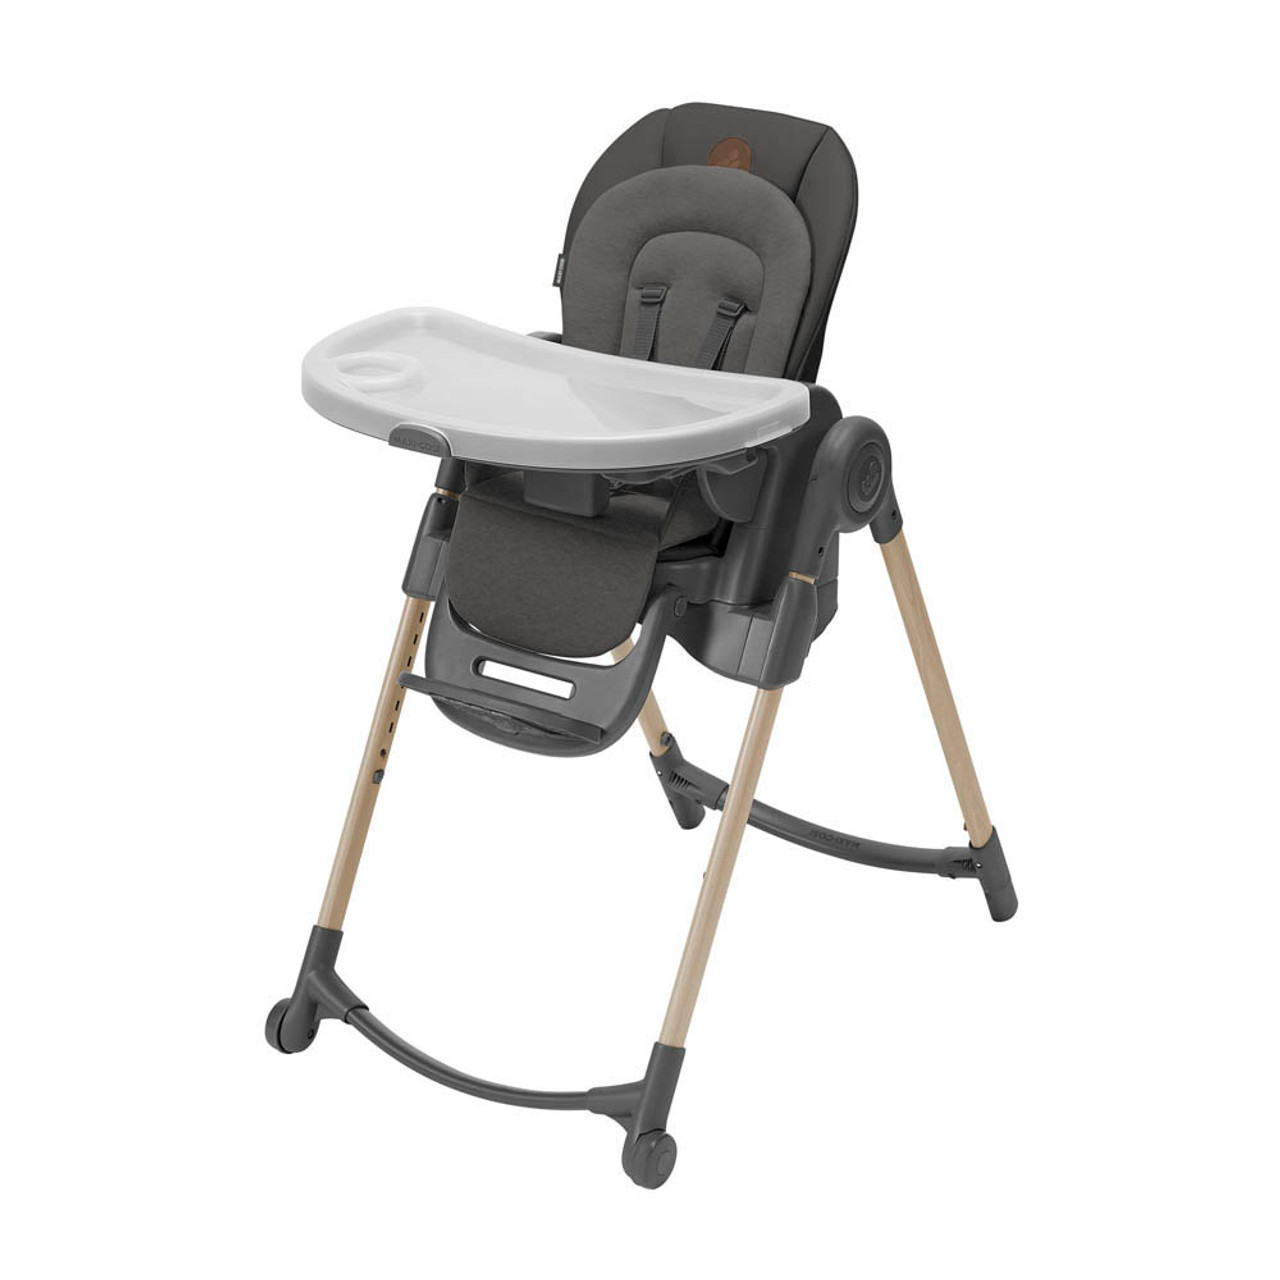 Maxi-Cosi l Minla highchair l How to adjust the tray 